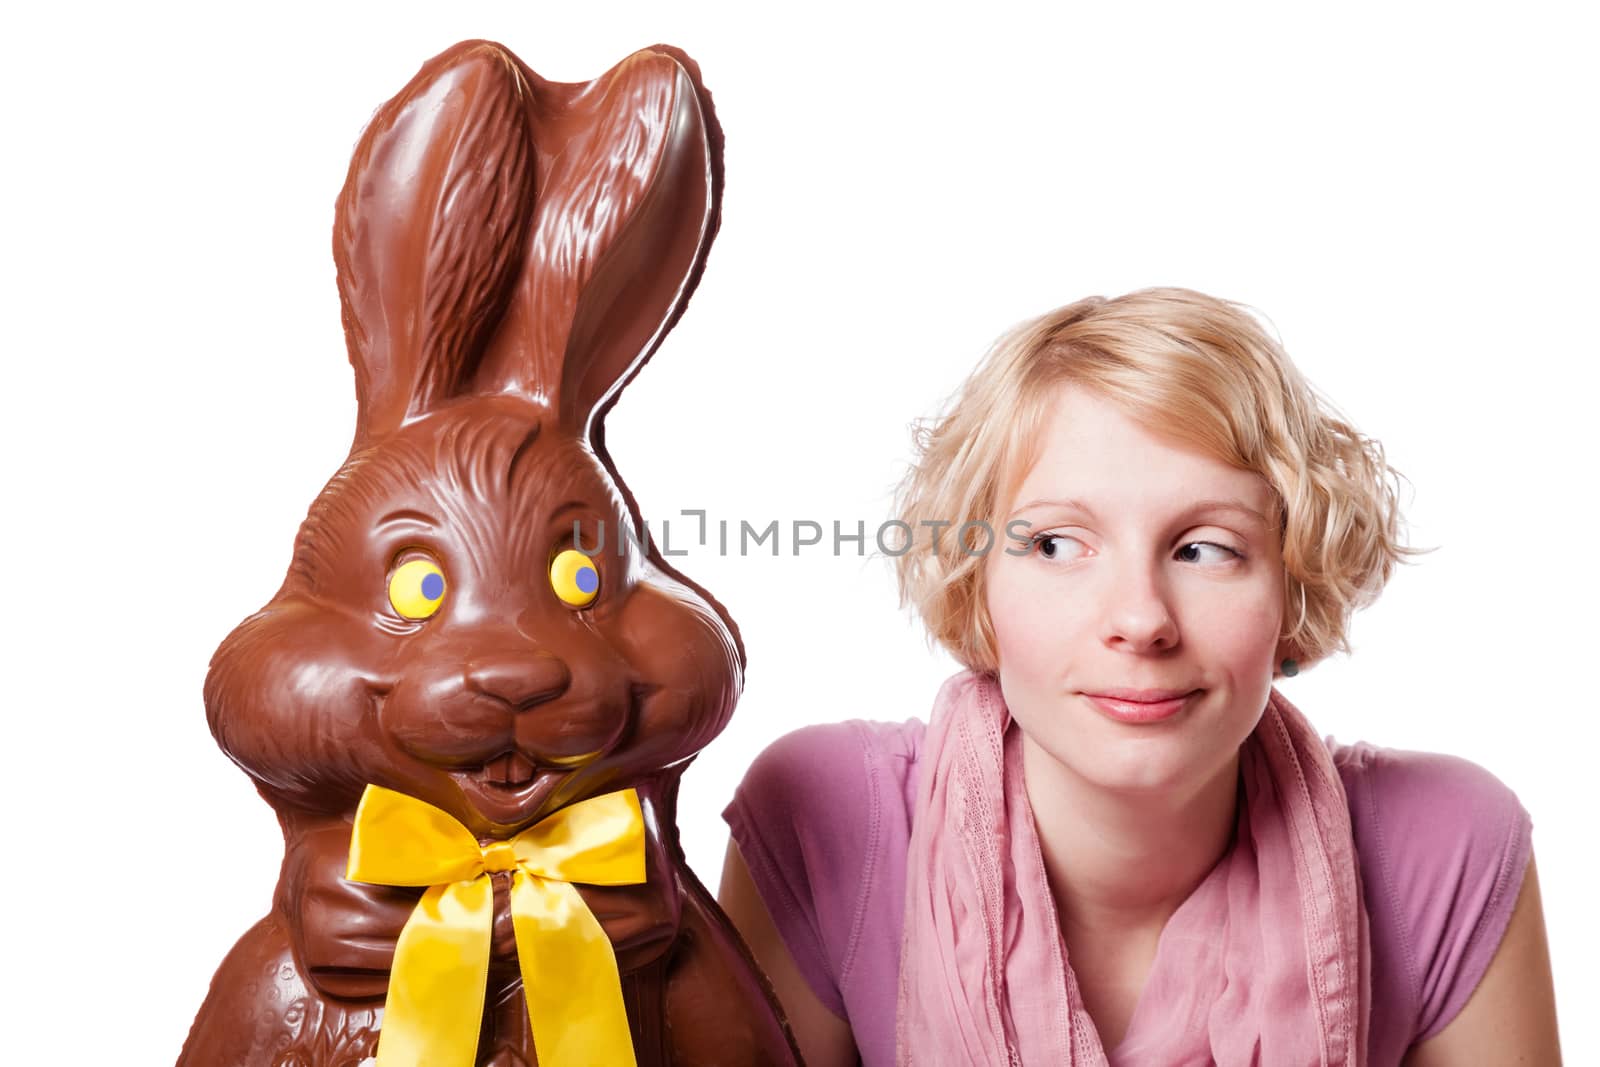 Chocolate Easter Bunny Looking at a Blond Girl by aetb